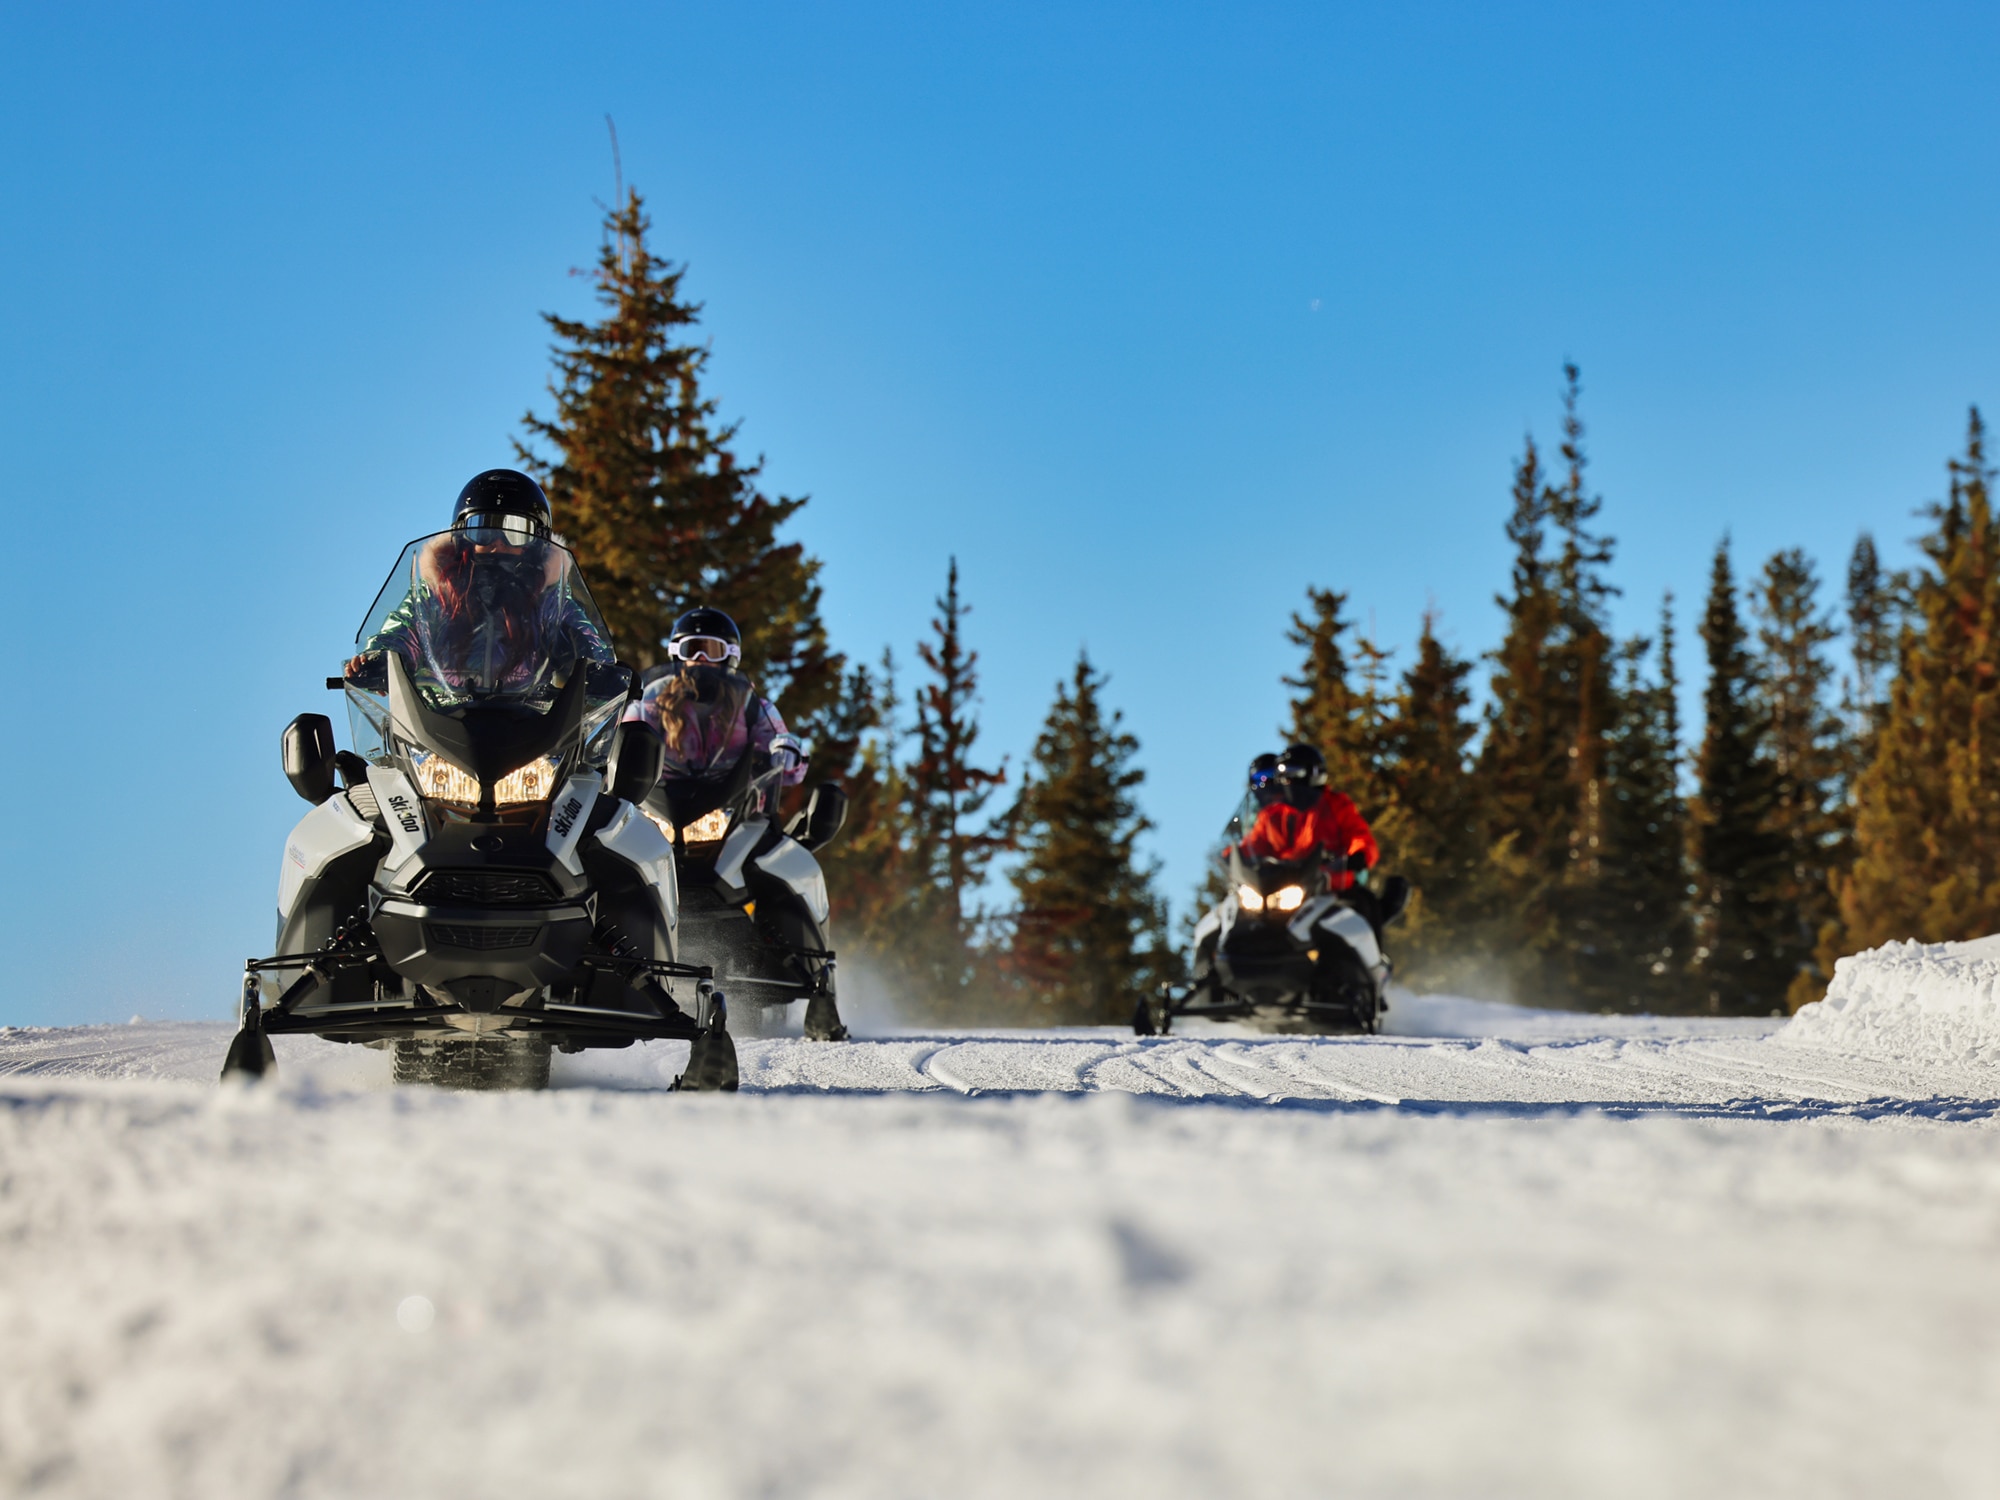 Take the lead on this Ski-Doo trip in Winter Park, CO